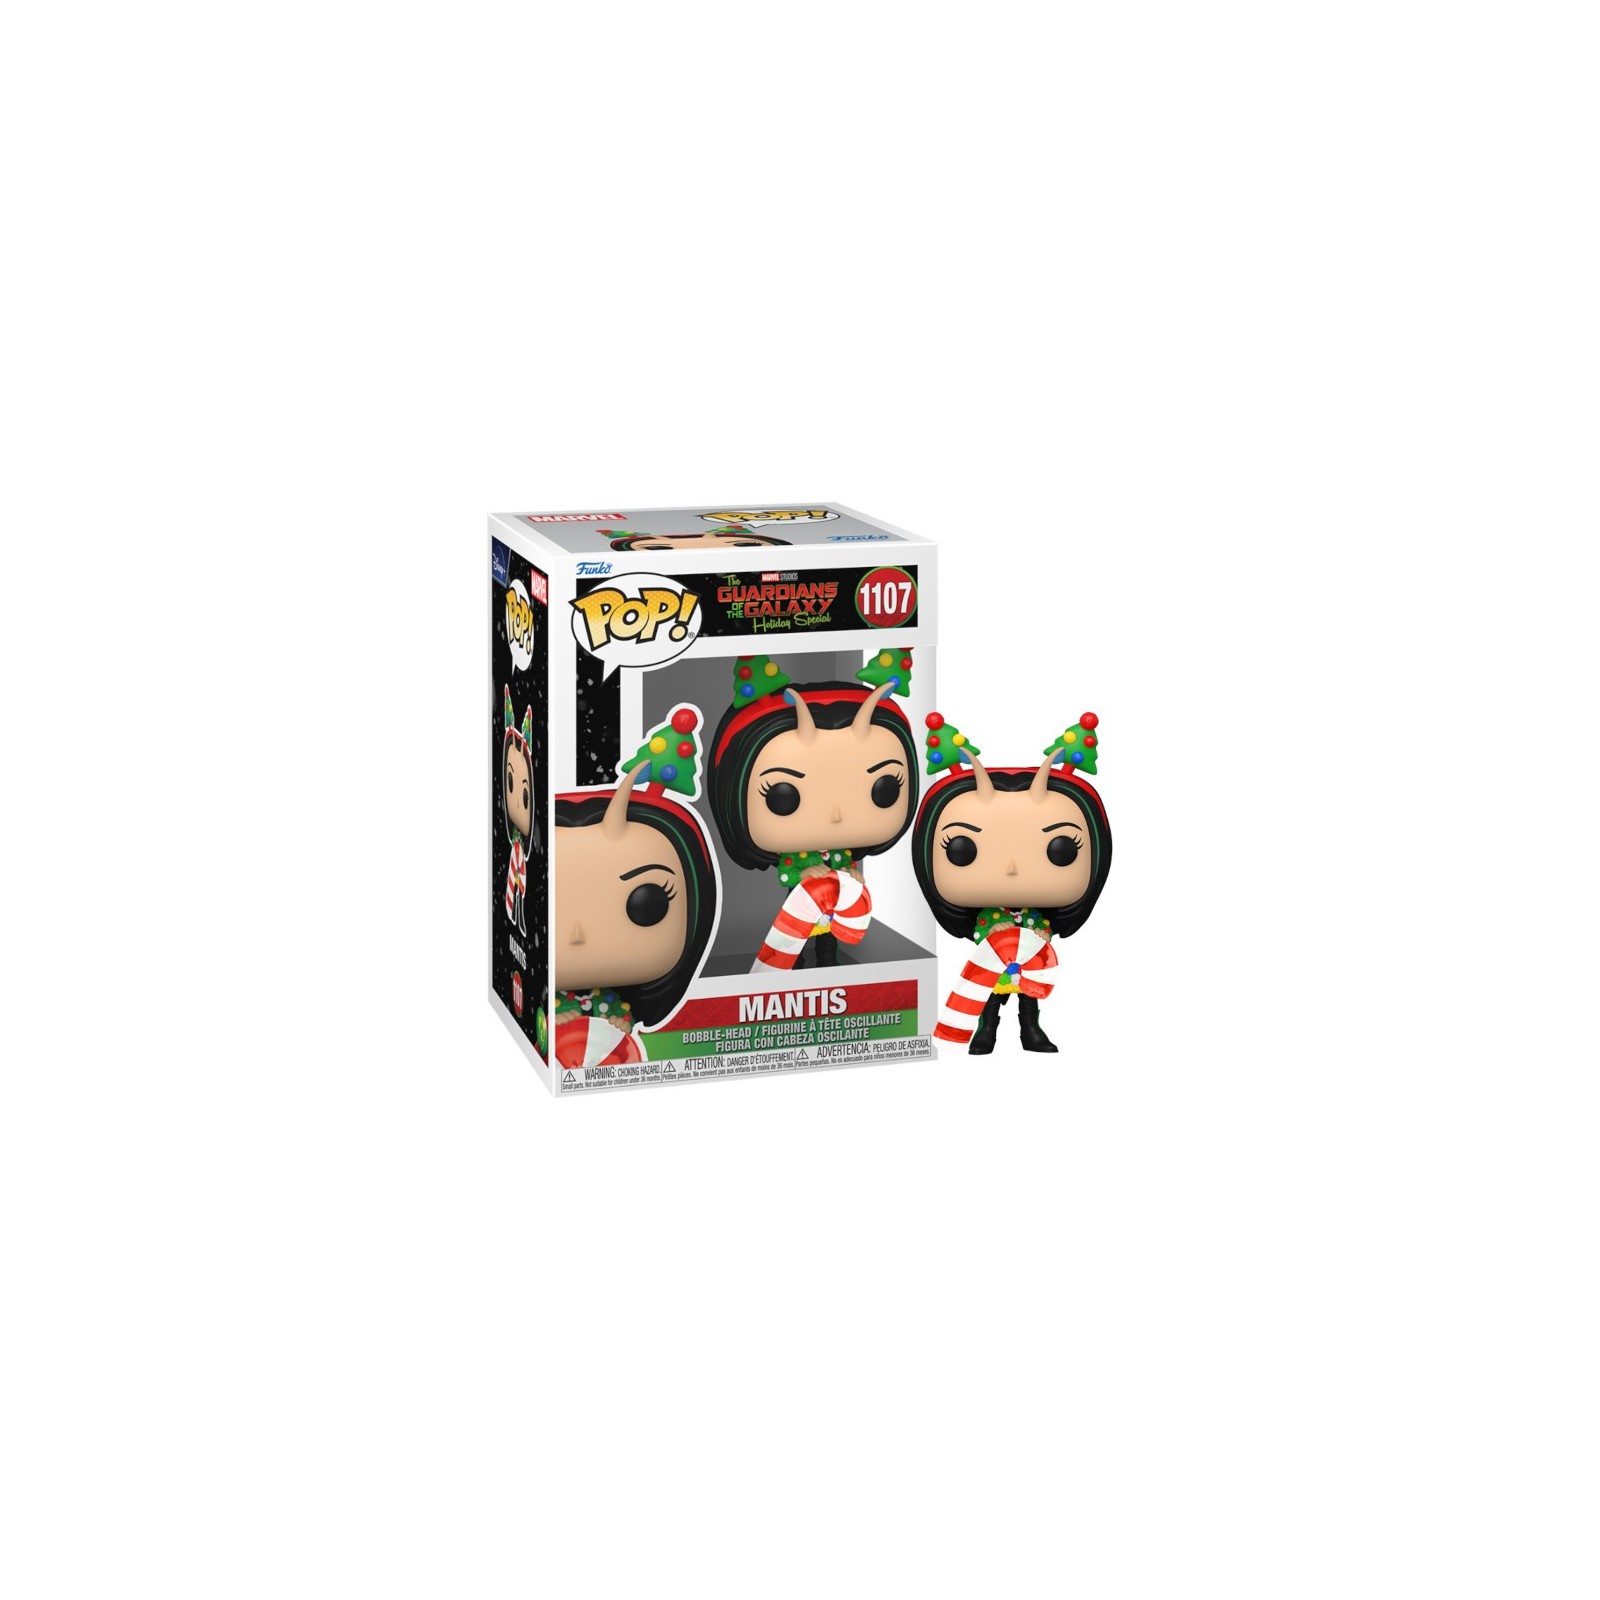 FUNKO POP! MARVEL THE GUARDIANS OF THE GALAXY HOLIDAY SPECIAL: MANTIS (1107)